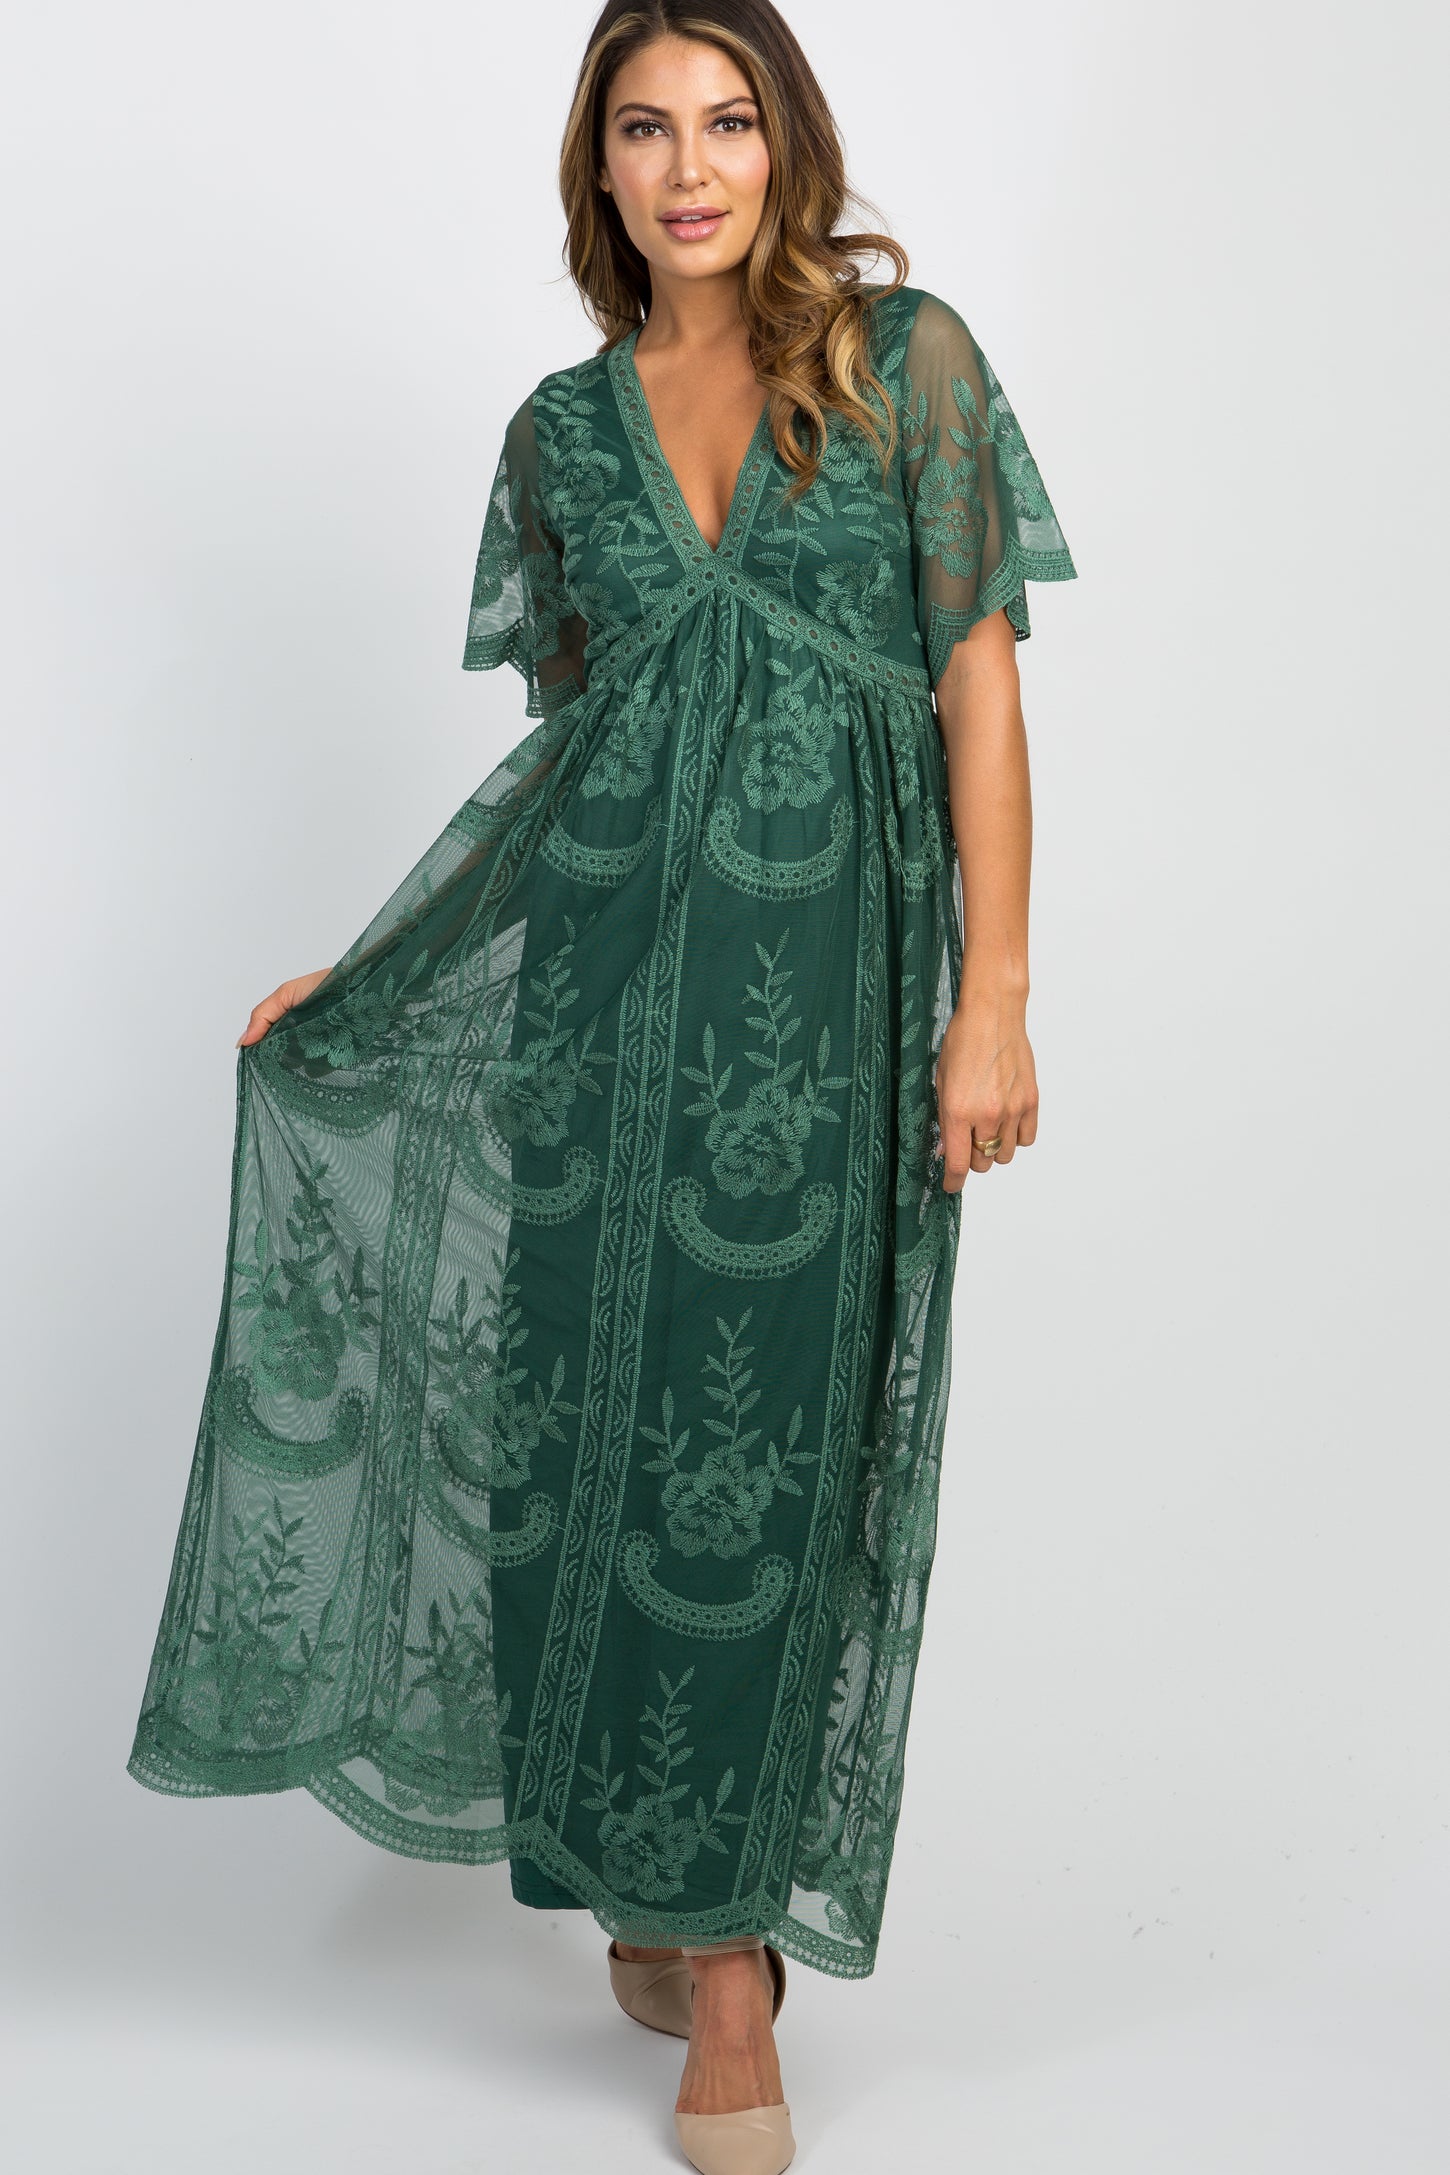 Teal Green Lace Mesh Overlay Maxi Dress